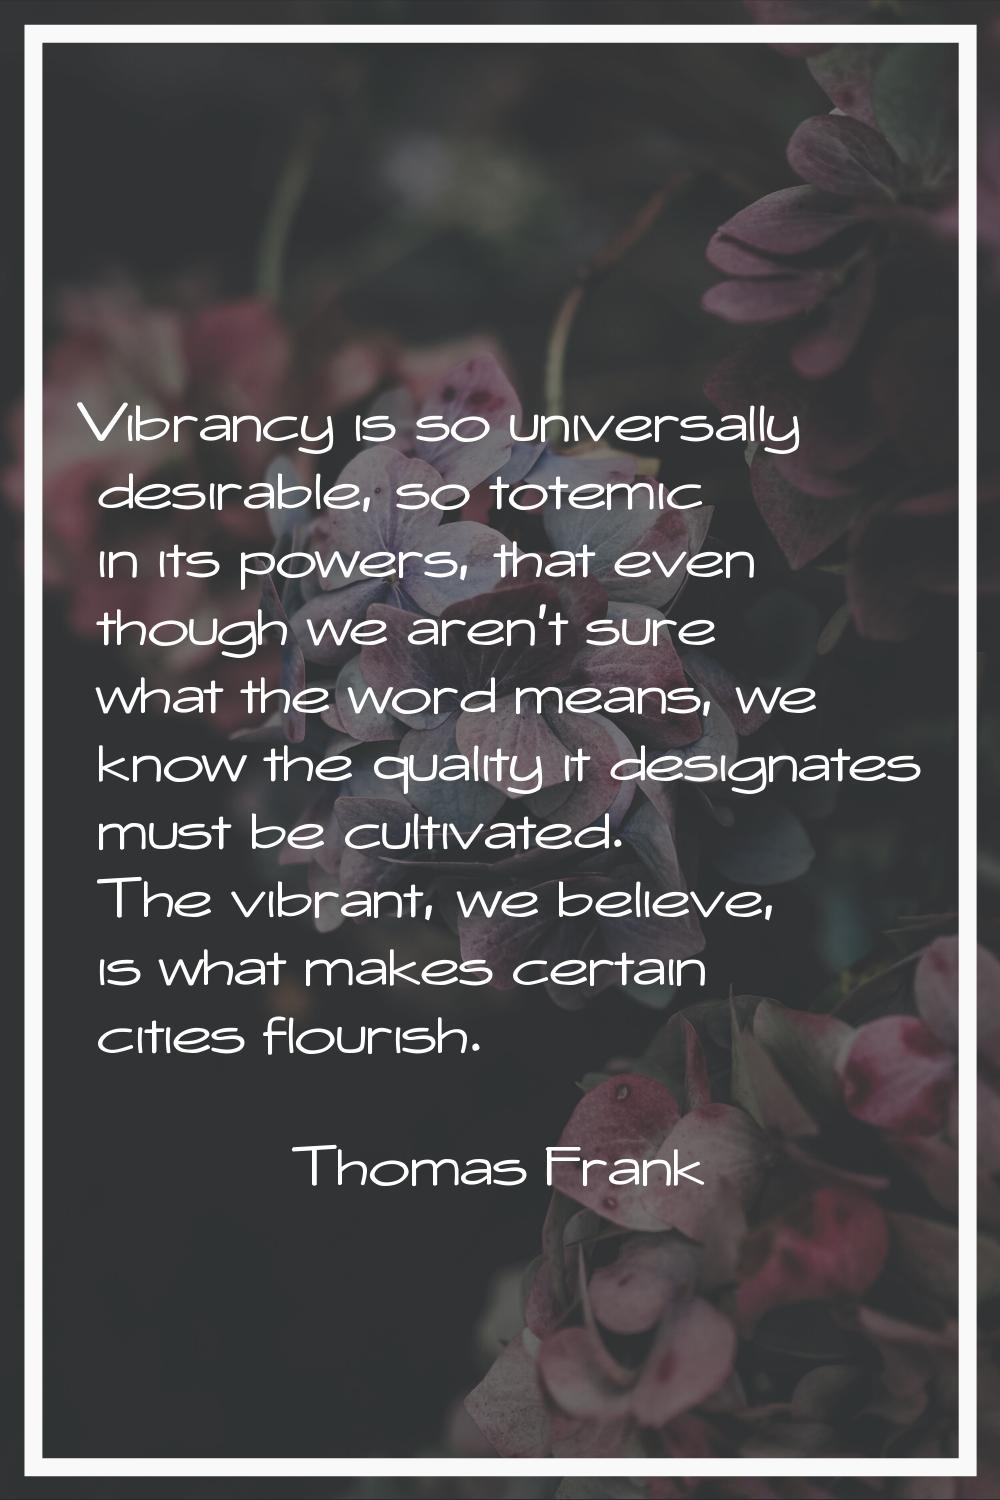 Vibrancy is so universally desirable, so totemic in its powers, that even though we aren't sure wha